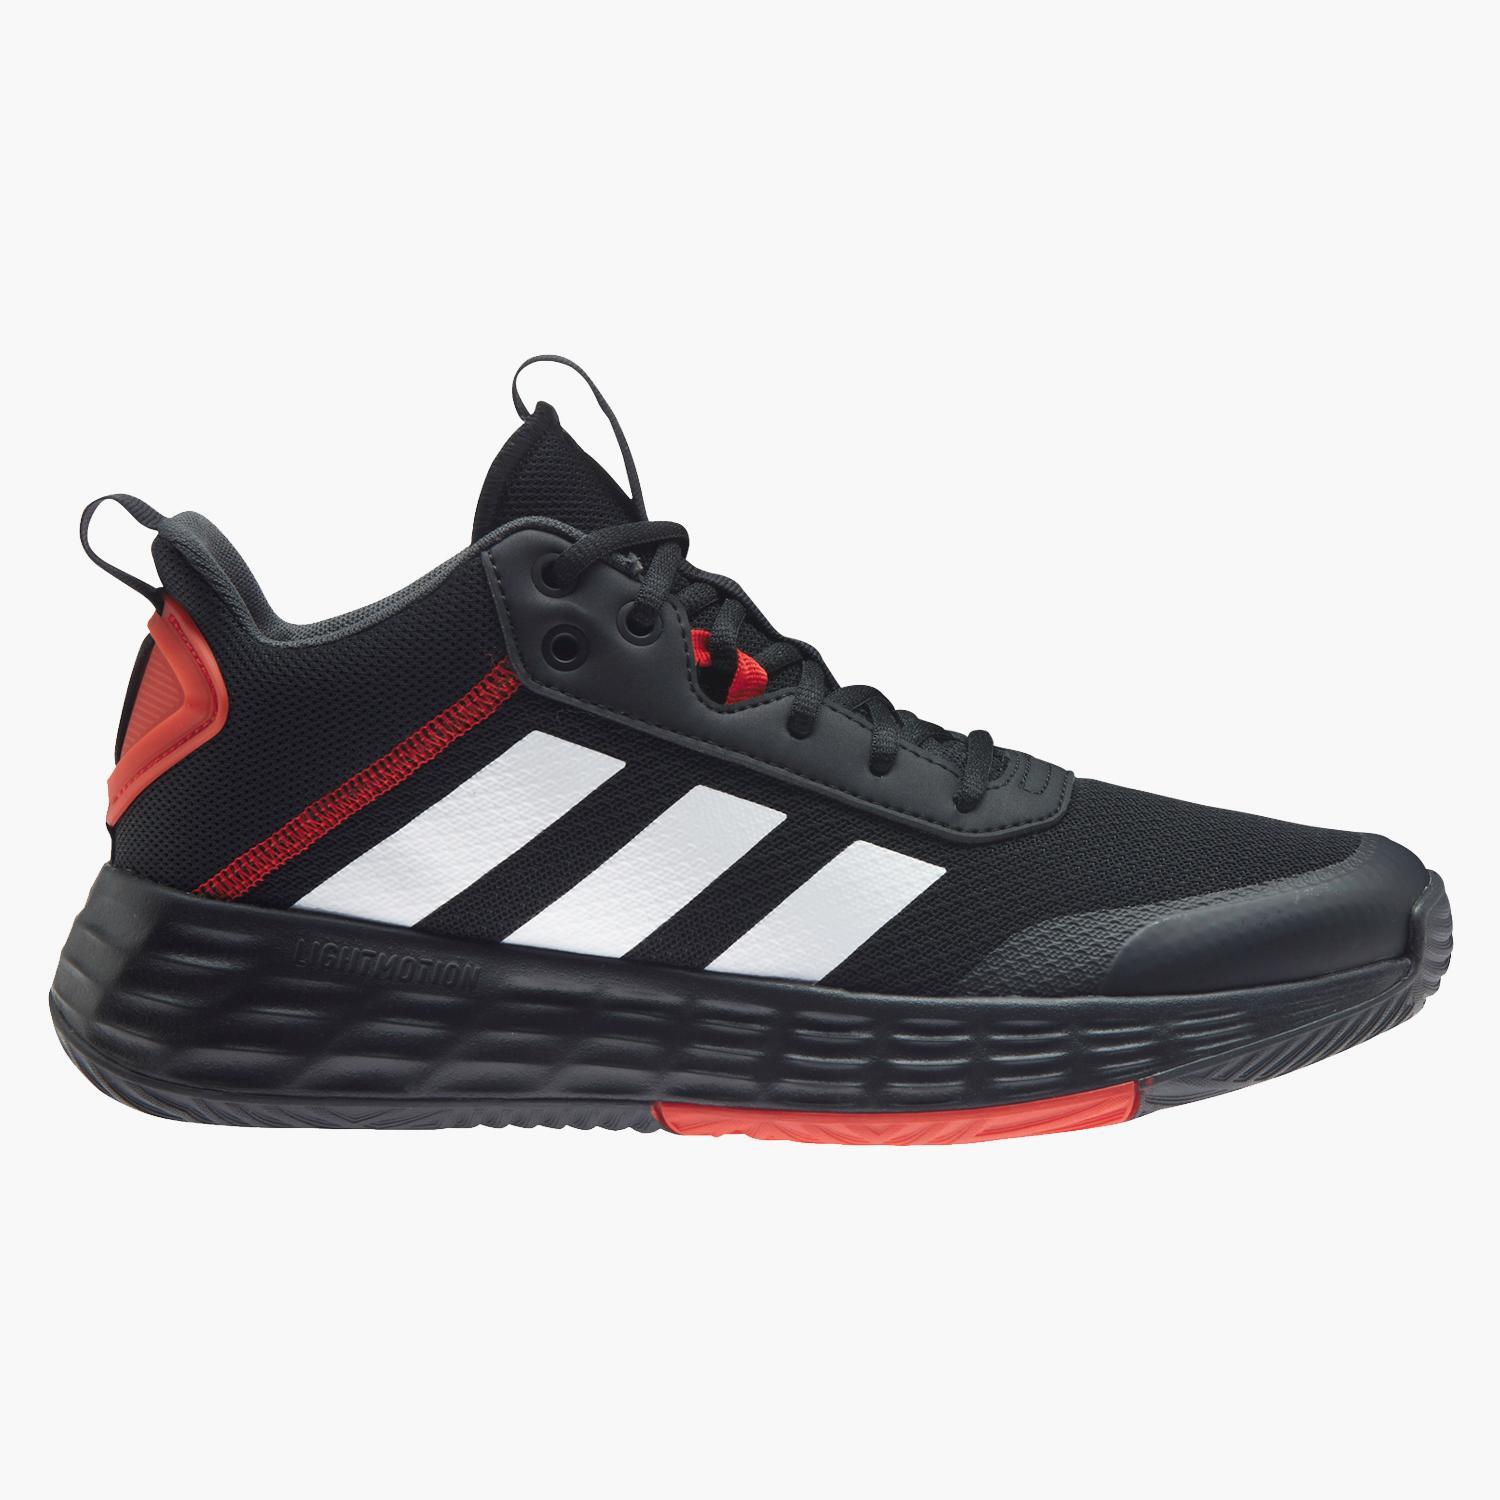 adidas Ownthegame 2.0 - Noire - Chaussure de basketball homme sports taille 40.5